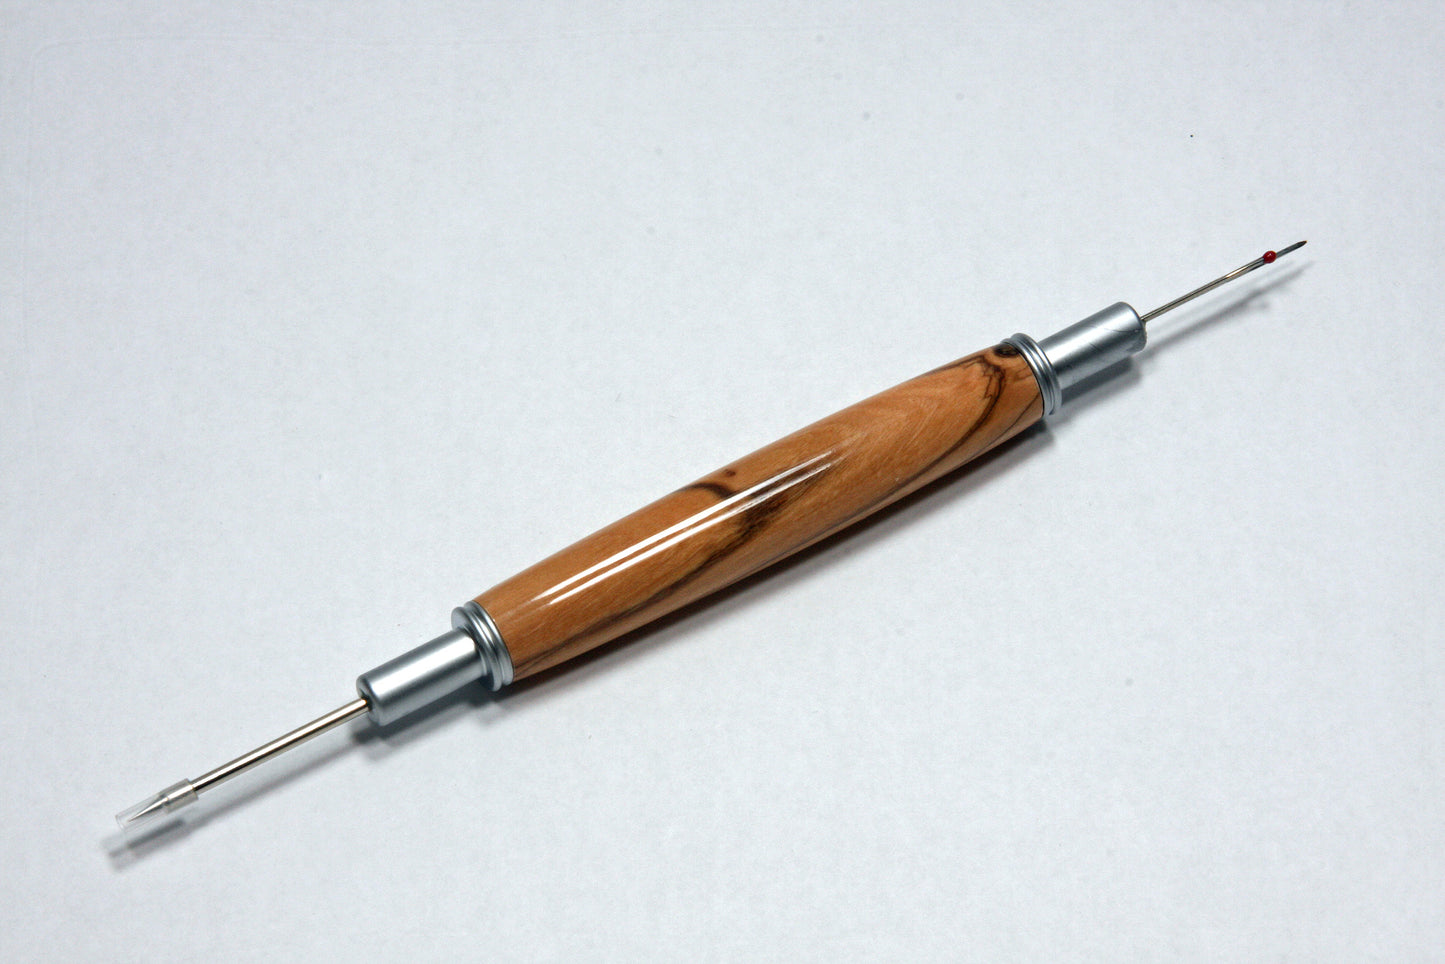 Handcrafted Olivewood Double-Bladed Seam Ripper with Manganese Steel Blades